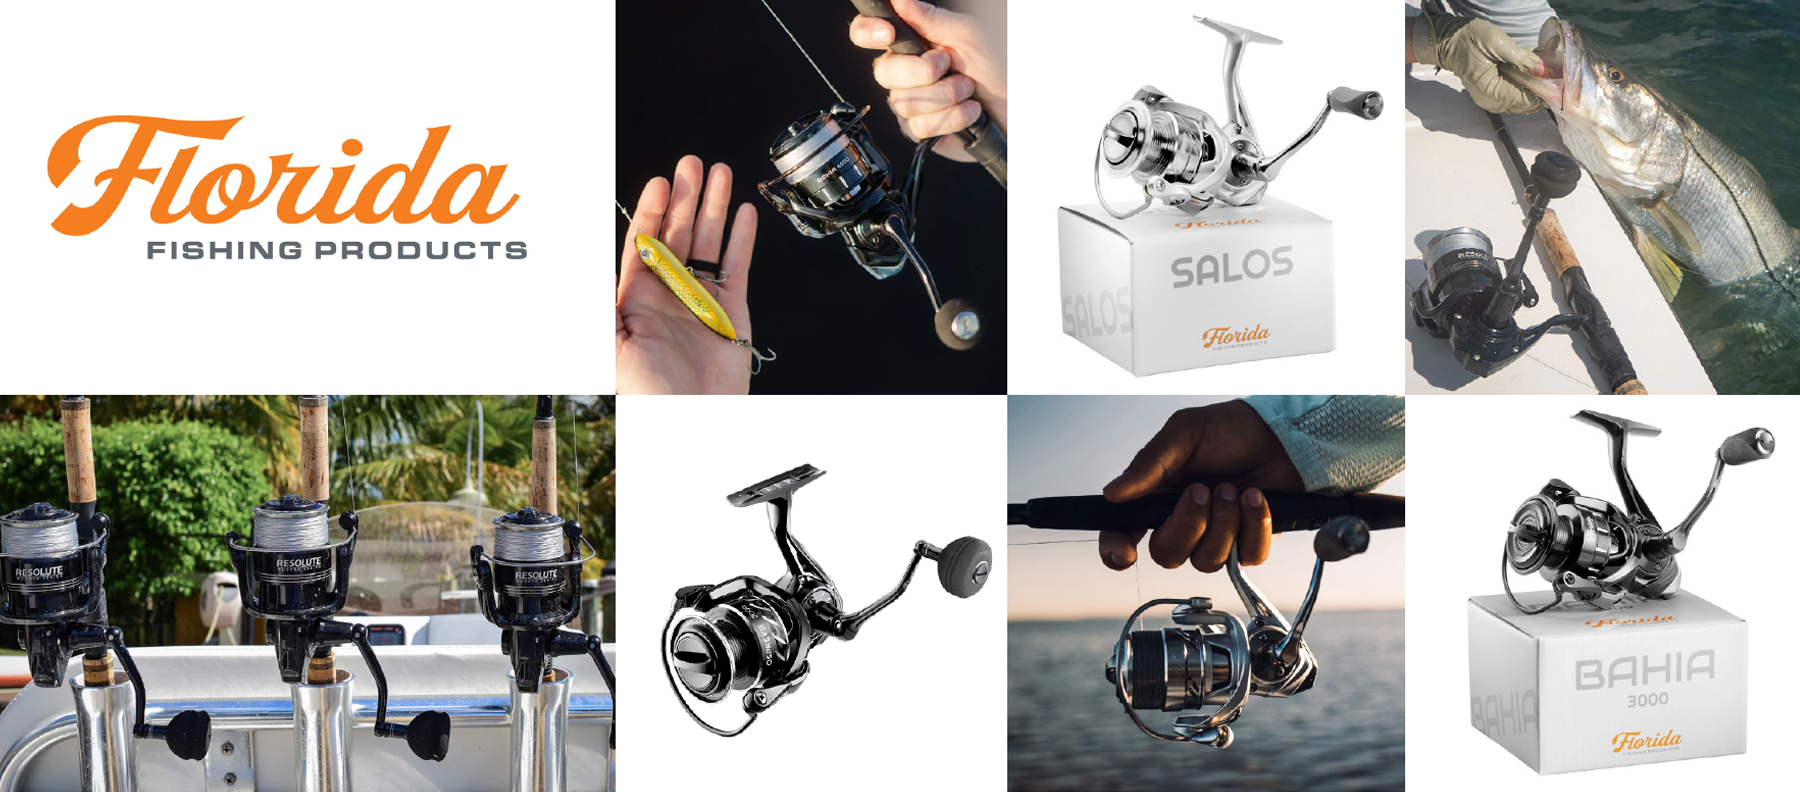 Crook & Crook Marine and Tackle – Crook and Crook Fishing, Electronics, and  Marine Supplies